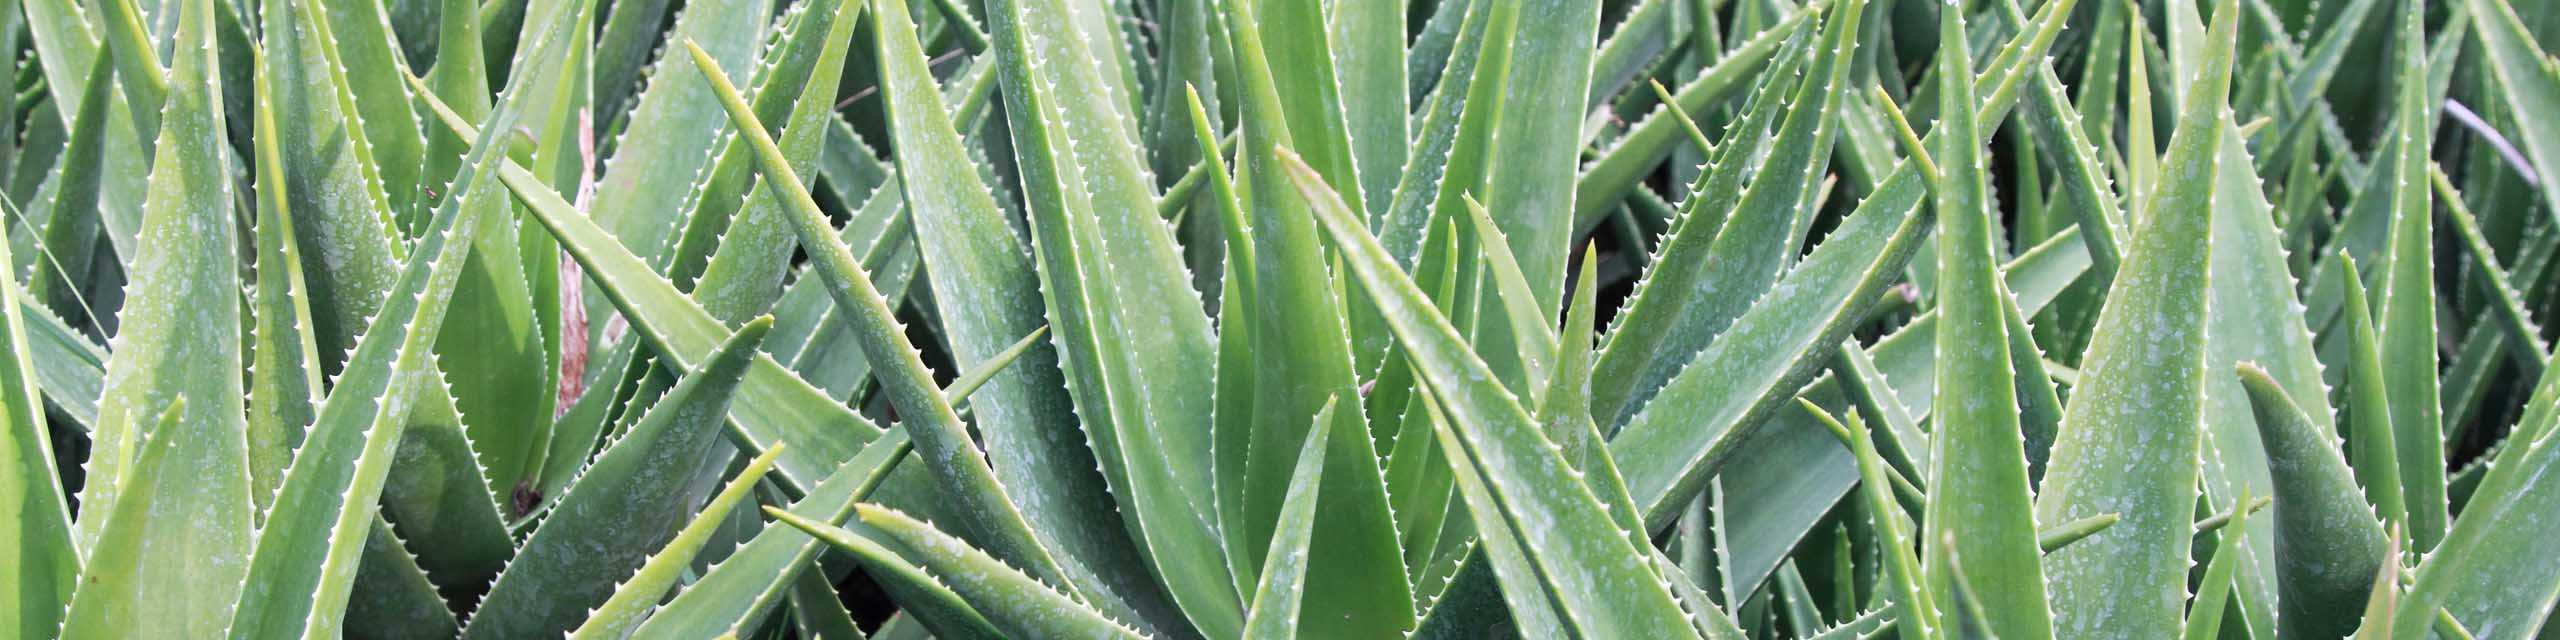 Cropped in image of many aloe vera plants growing in garden.